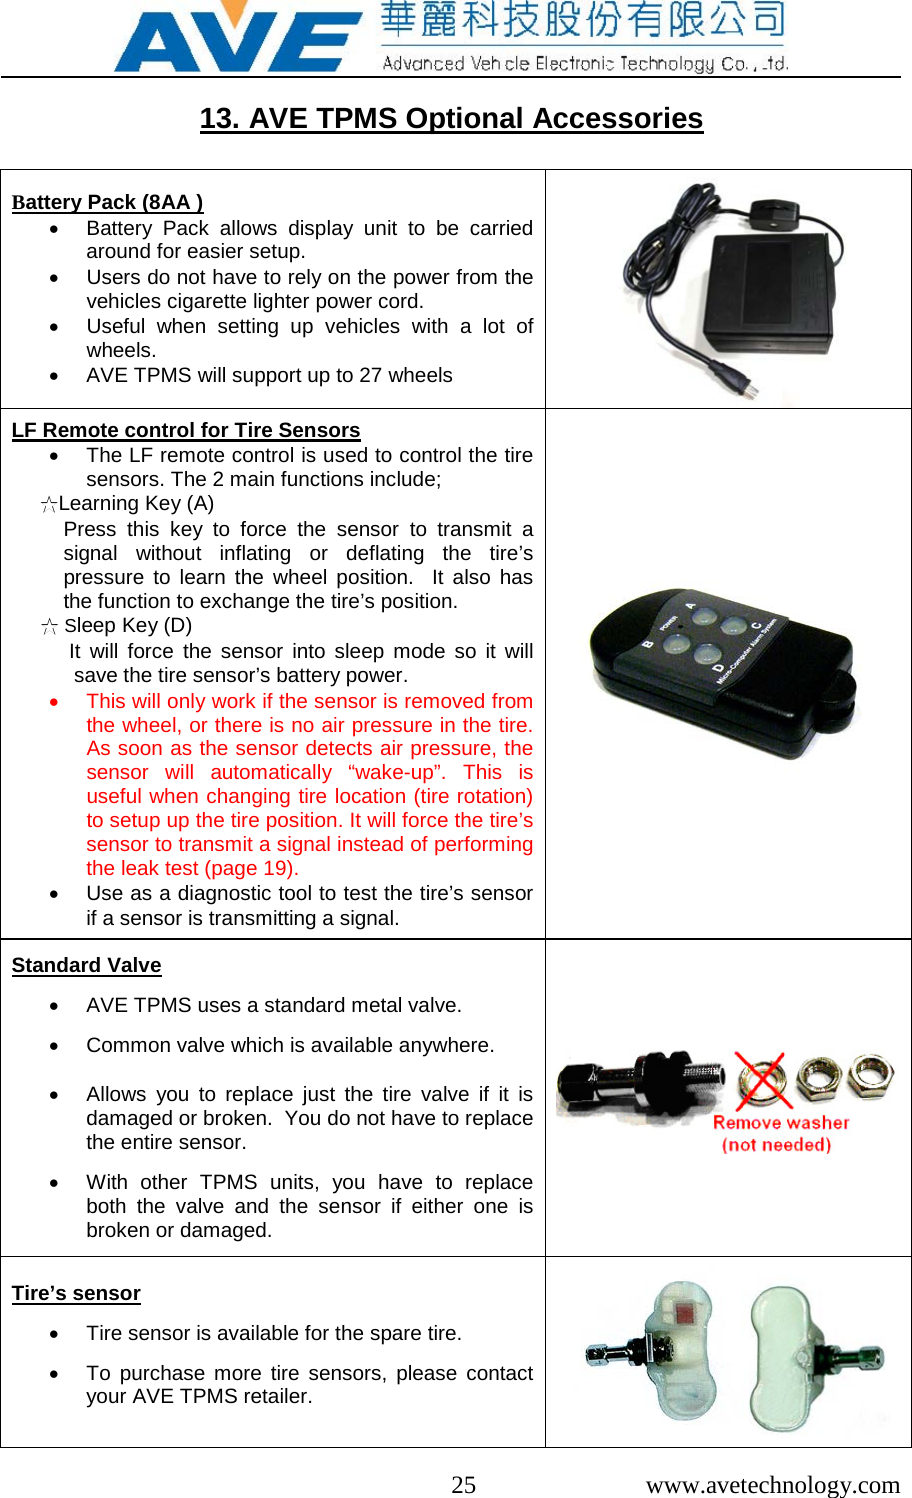  25  www.avetechnology.com  13. AVE TPMS Optional Accessories  Battery Pack (8AA ) • Battery Pack allows display unit to be carried around for easier setup.  • Users do not have to rely on the power from the  vehicles cigarette lighter power cord. • Useful when setting up vehicles with a lot of wheels. • AVE TPMS will support up to 27 wheels  LF Remote control for Tire Sensors • The LF remote control is used to control the tire sensors. The 2 main functions include; ☆Learning Key (A)           Press this key  to  force  the  sensor to transmit a signal without inflating or deflating  the  tire’s pressure to learn the  wheel position.  It also has the function to exchange the tire’s position.      ☆ Sleep Key (D)           It will force  the  sensor into sleep mode so it will save the tire sensor’s battery power.    • This will only work if the sensor is removed from the wheel, or there is no air pressure in the tire.  As soon as the sensor detects air pressure, the sensor will automatically “wake-up”. This is useful when changing tire location (tire rotation) to setup up the tire position. It will force the tire’s sensor to transmit a signal instead of performing the leak test (page 19).  • Use as a diagnostic tool to test the tire’s sensor if a sensor is transmitting a signal.  Standard Valve  • AVE TPMS uses a standard metal valve.  • Common valve which is available anywhere.   • Allows you to replace just the tire valve if it is damaged or broken.  You do not have to replace the entire sensor.  • With other TPMS units, you have to replace both the valve and the sensor if either one is broken or damaged.   Tire’s sensor  • Tire sensor is available for the spare tire.   • To purchase more tire sensors, please contact your AVE TPMS retailer.   